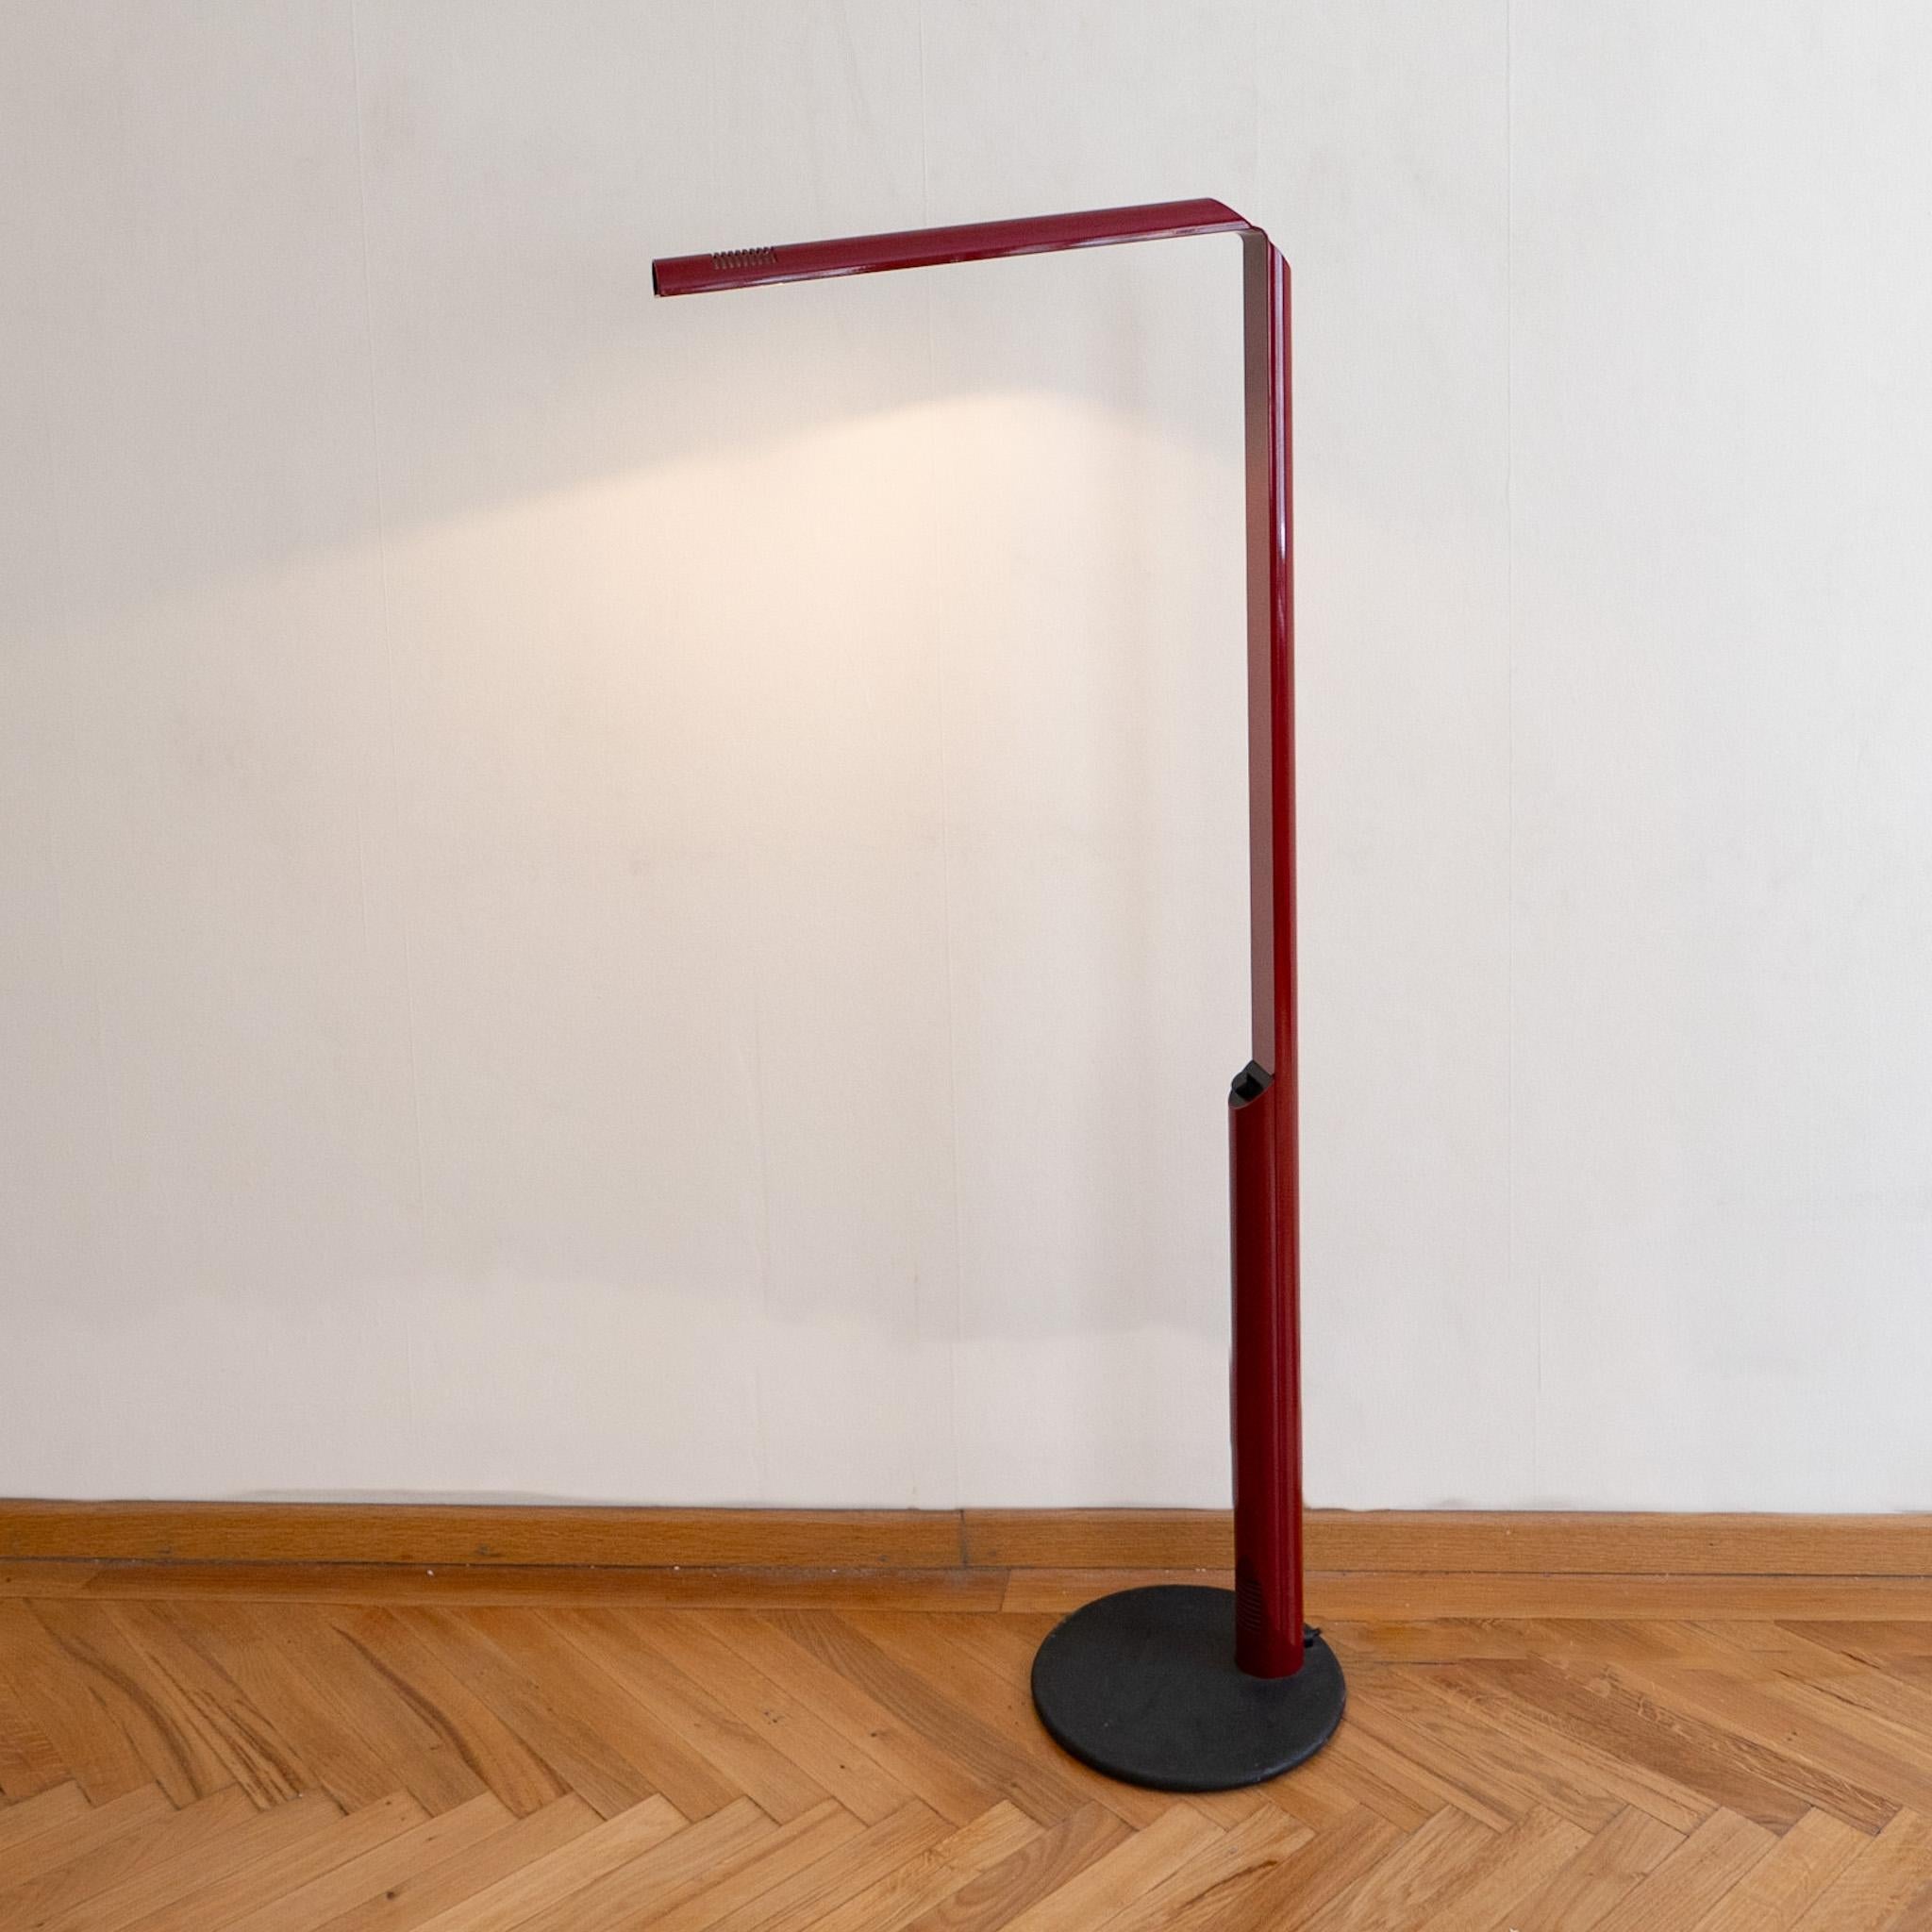 Mid-Century Modern Veronica Floor Lamp by Gianfranco Frattini for Luci Italia, Italy 1970s For Sale